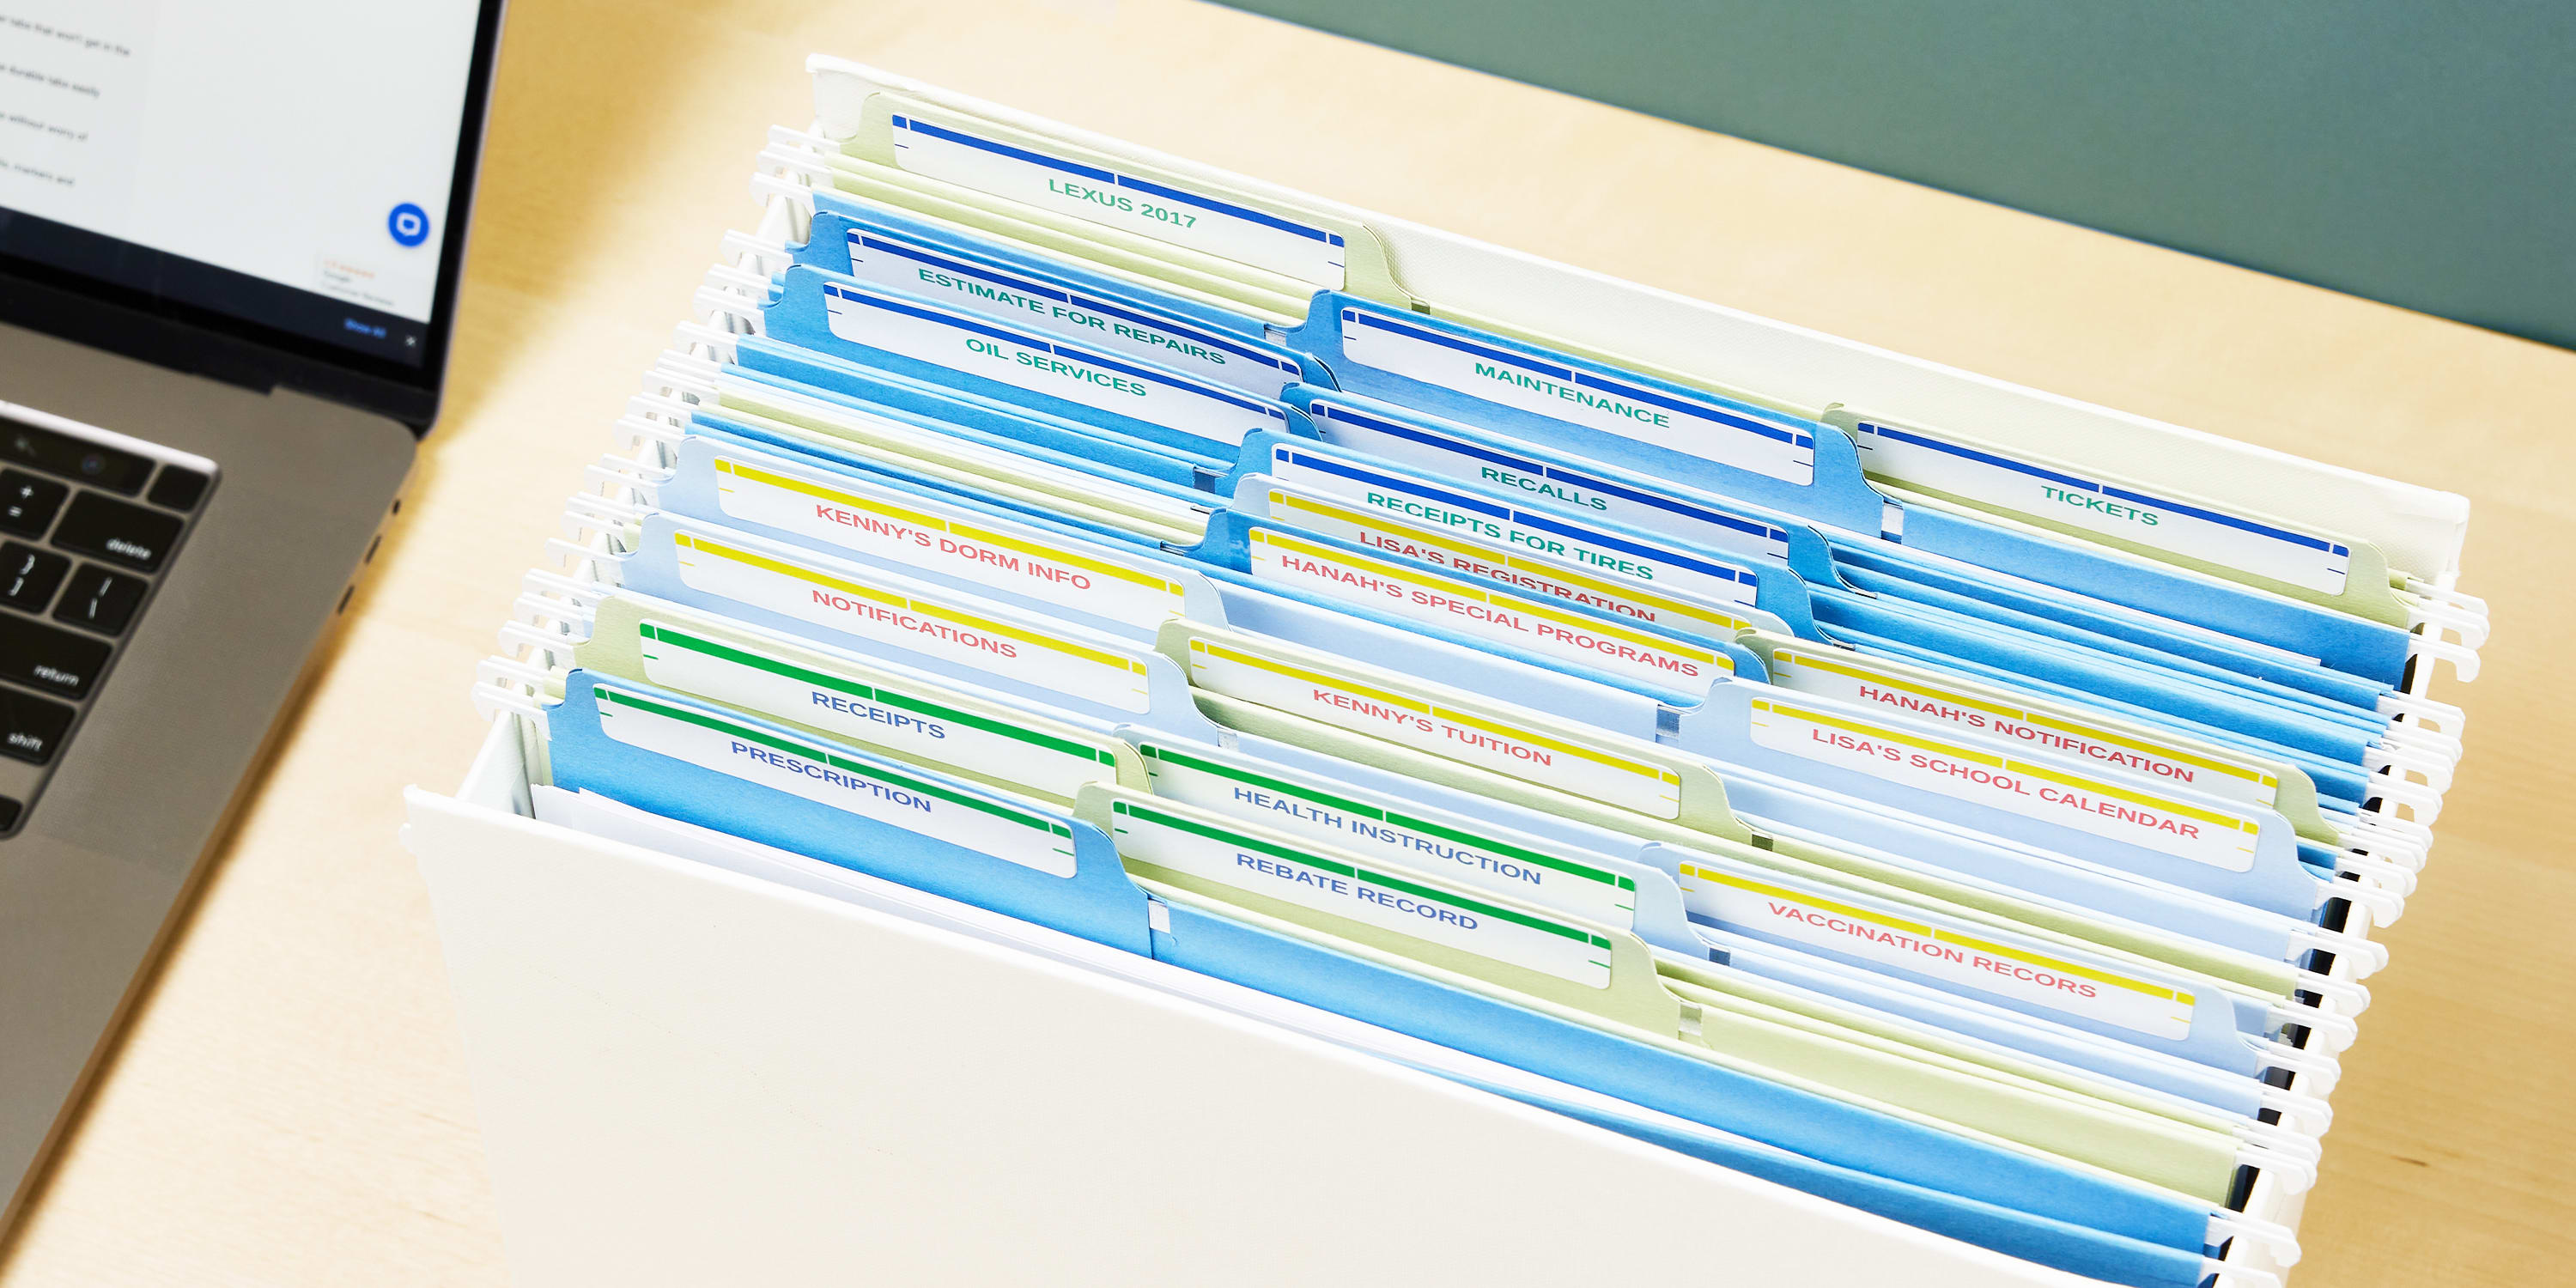 One of the best office supplies for staying organized are shown in action. Color-coded file labels are used to organize home office paperwork in a desktop file holder.